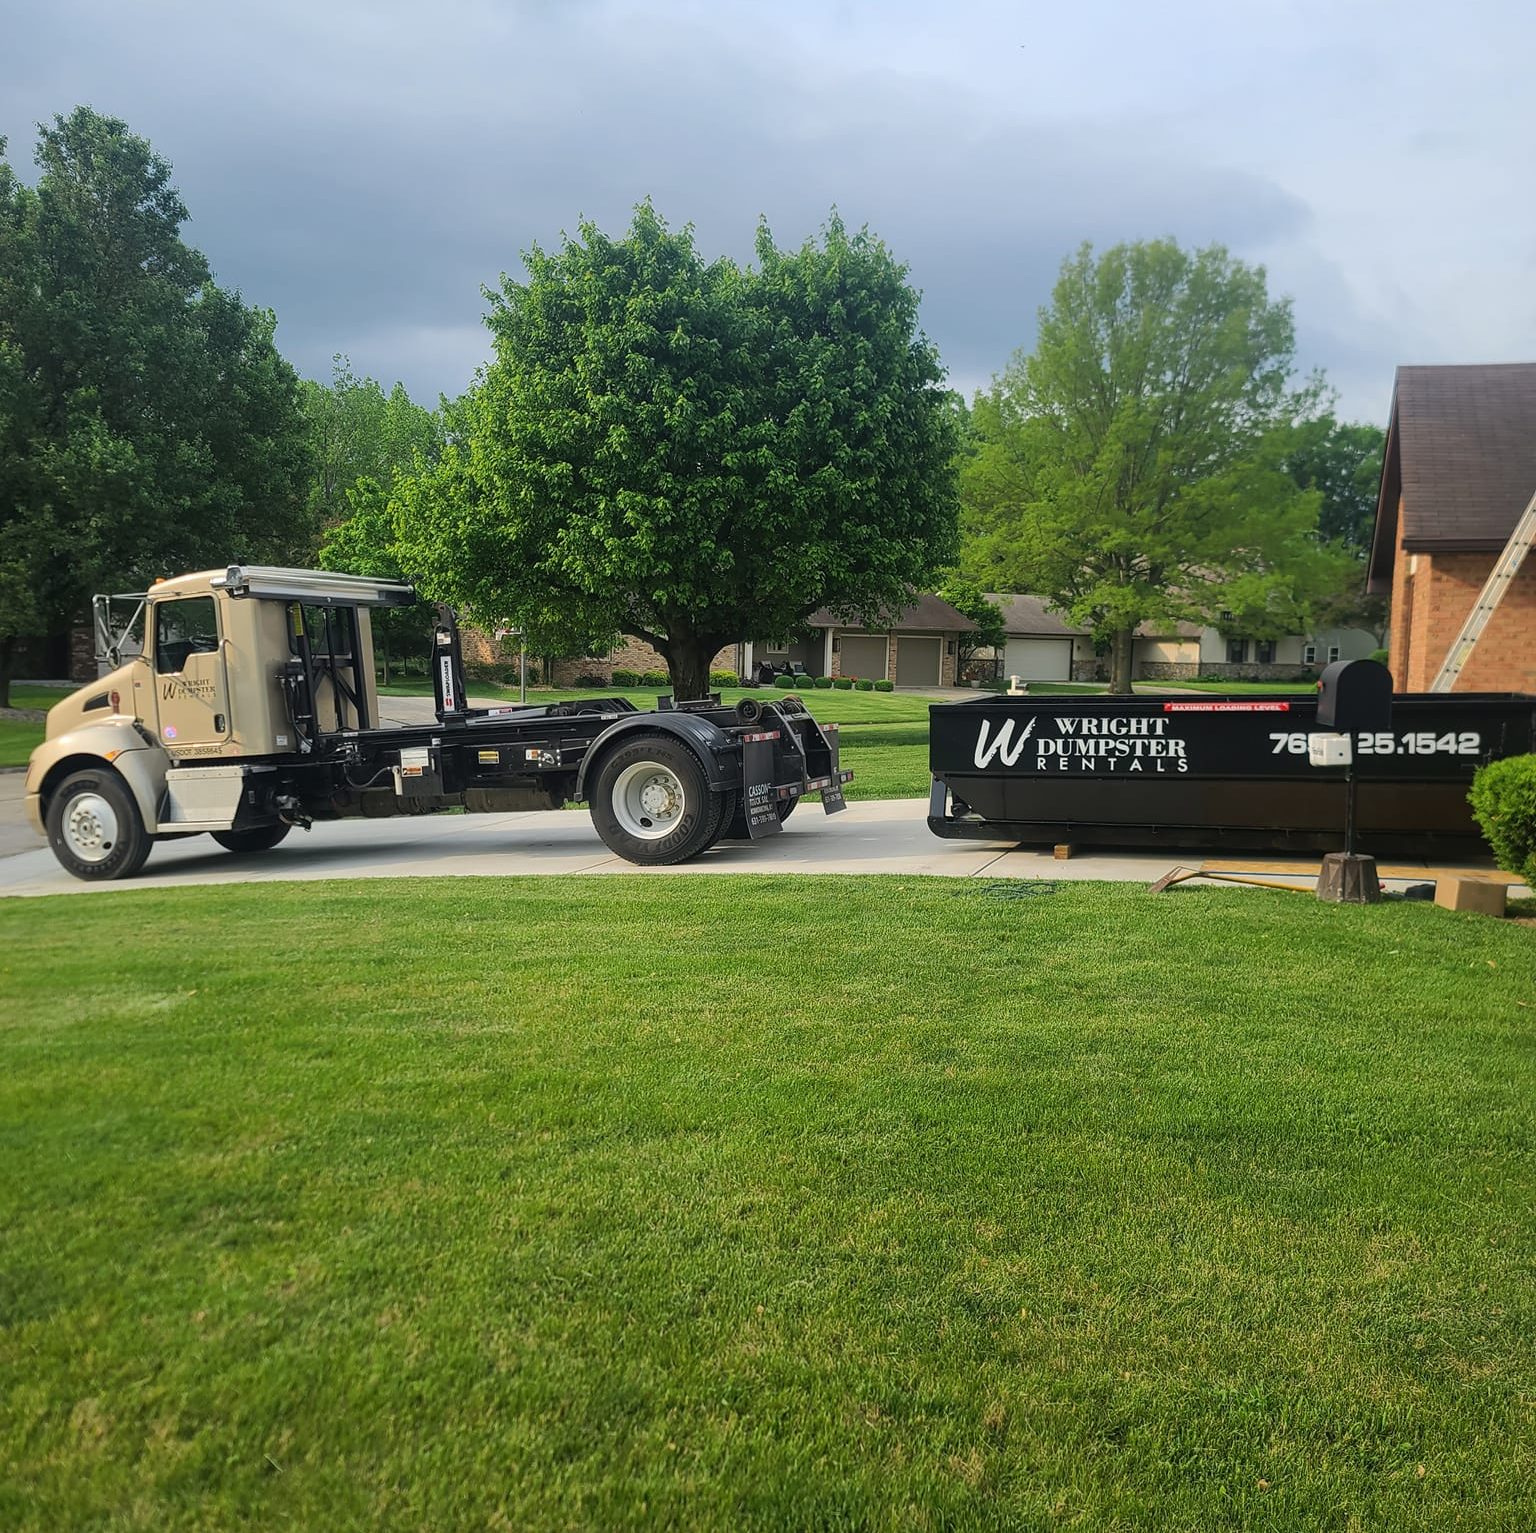 delivering a black 15 yard dumpster, dumpster rental services, fishers, madison county in, wright dumpster rentals